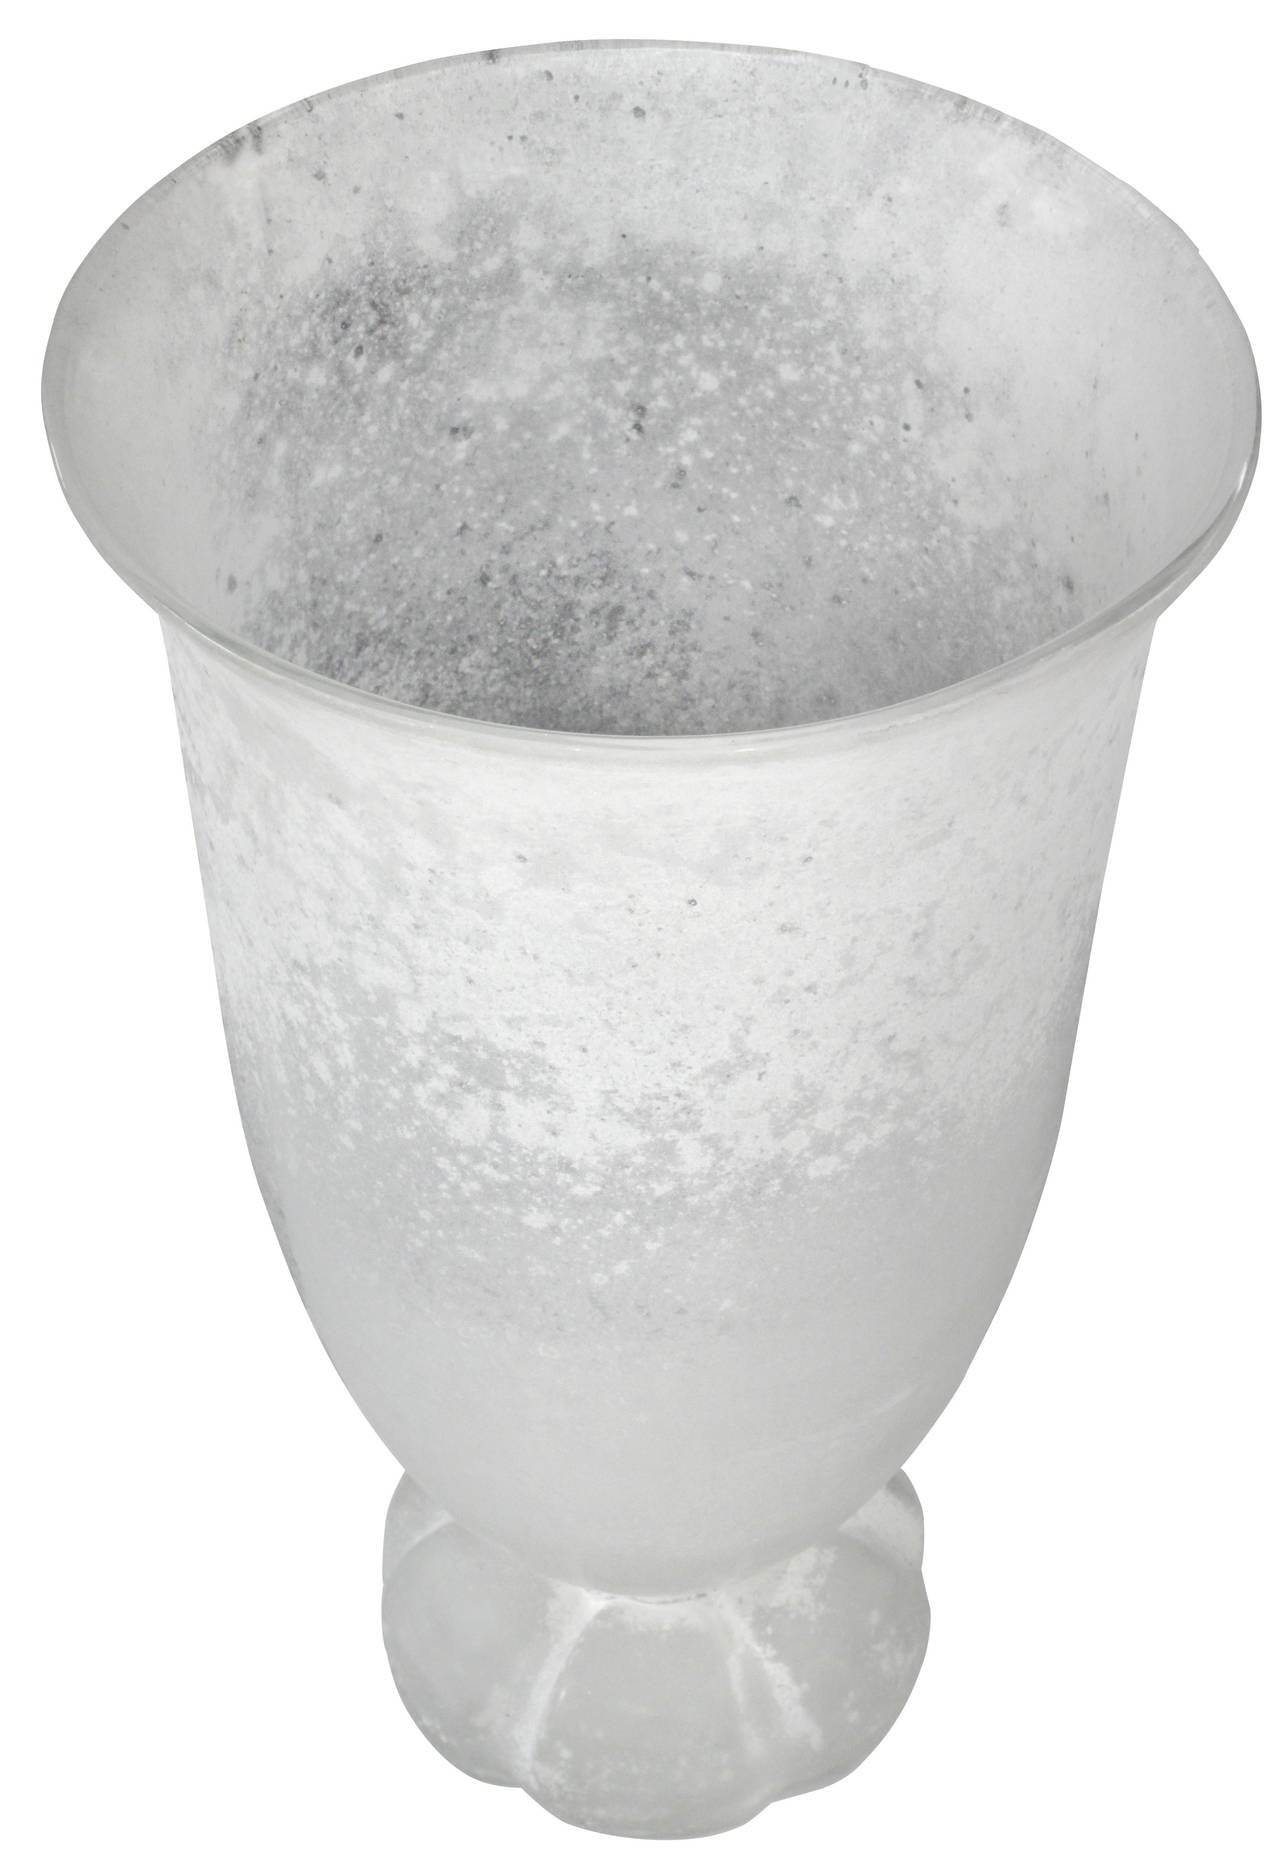 Large handblown glass urn or vase, white glass with Scavo (rough) finish, by Seguso (Murano, Italy) for Karl Springer, American, 1980s.
(Signed âKarl Springerâ on bottom).